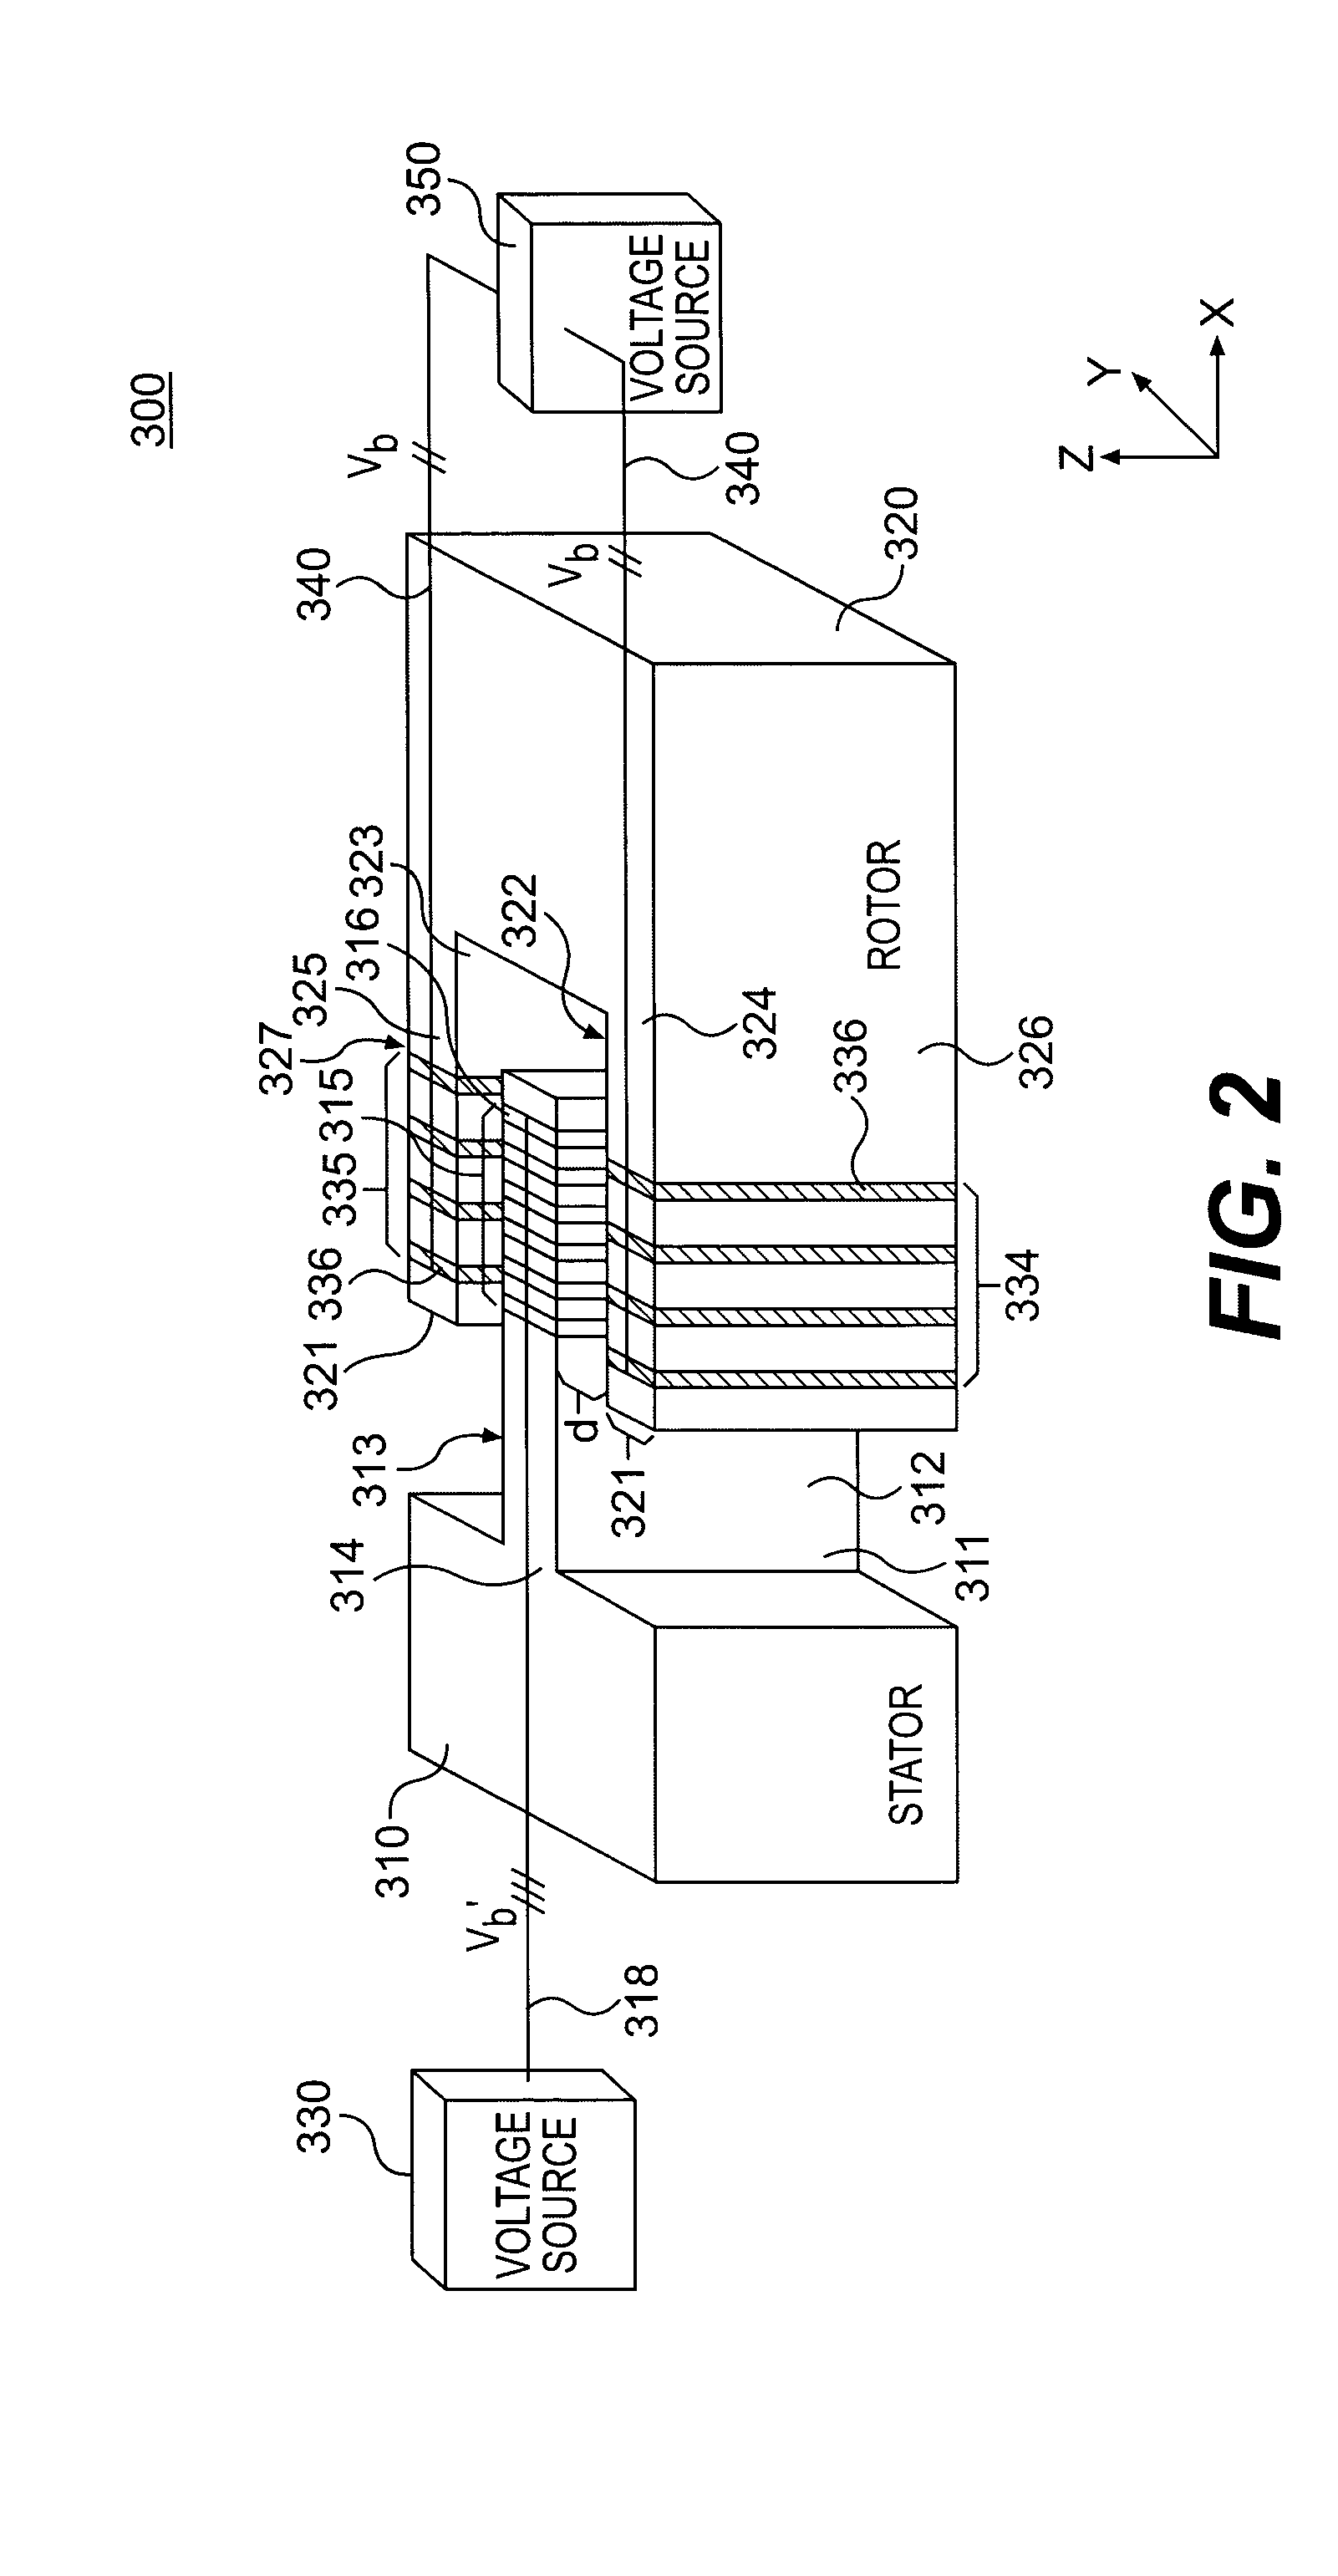 Stepping electrostatic comb drive actuator